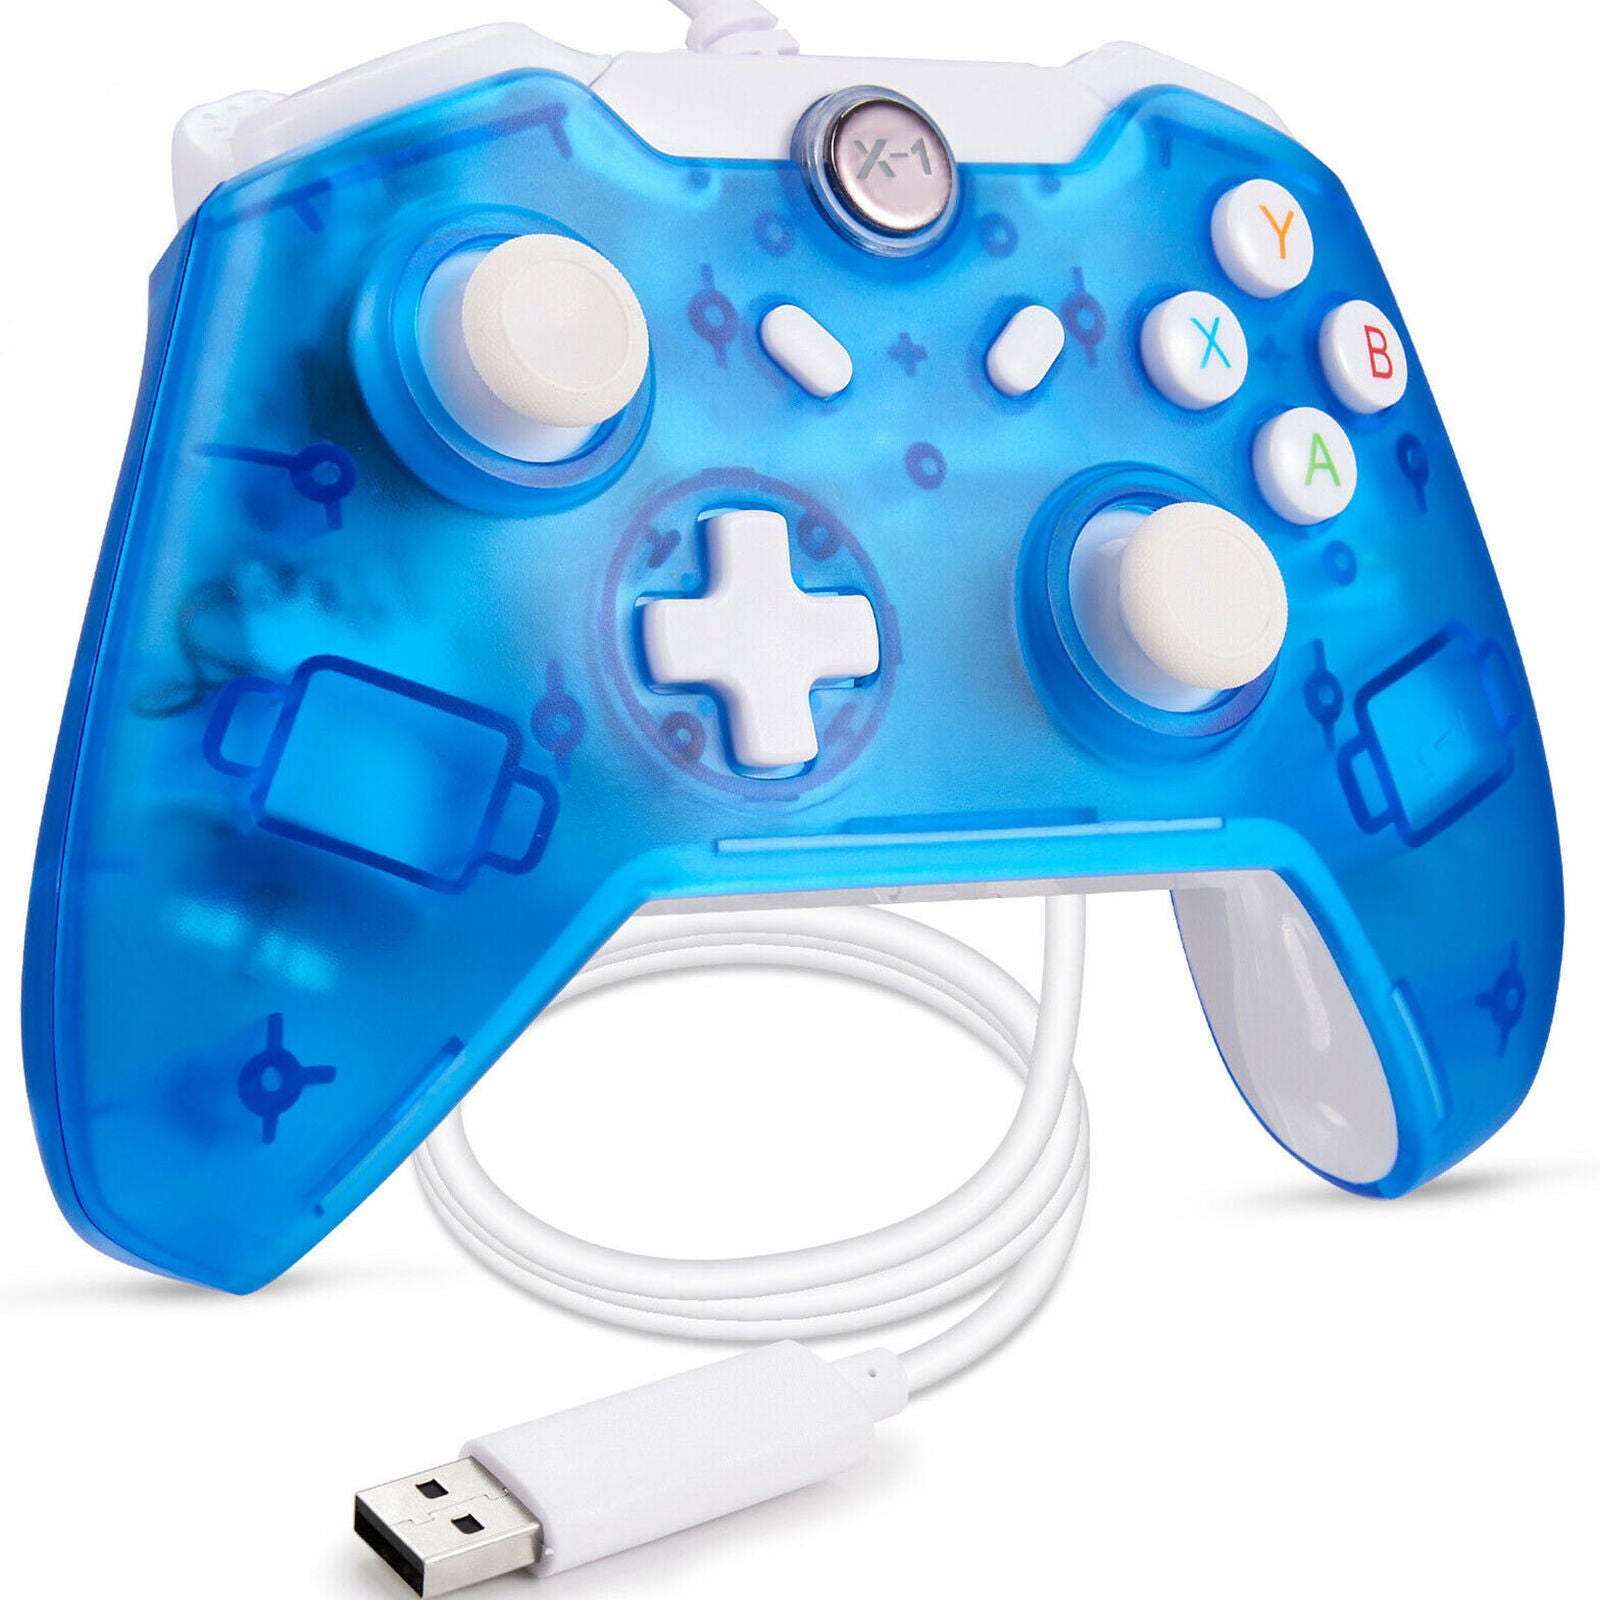 Long USB Wired Controller Gamepad For Microsoft Xbox One / One S / One X / PC